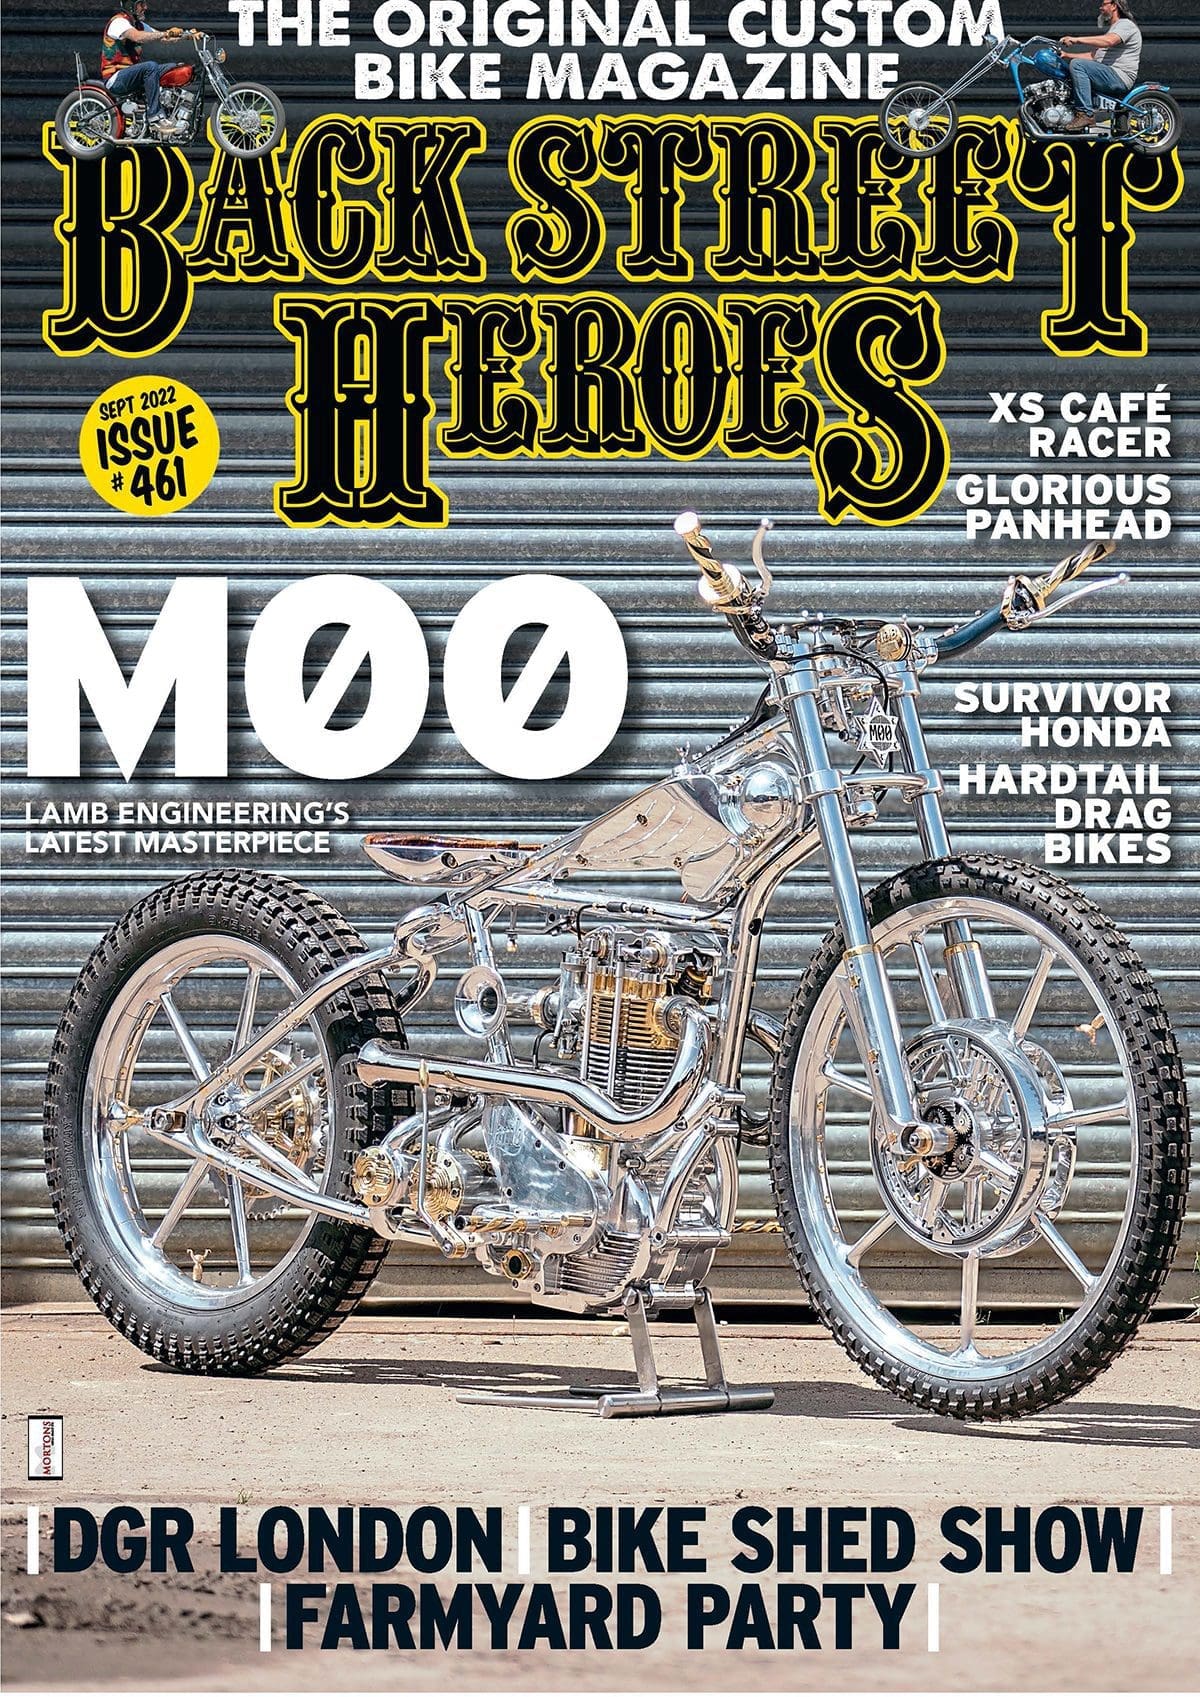 Preview: September Issue of Back Street Heroes Magazine